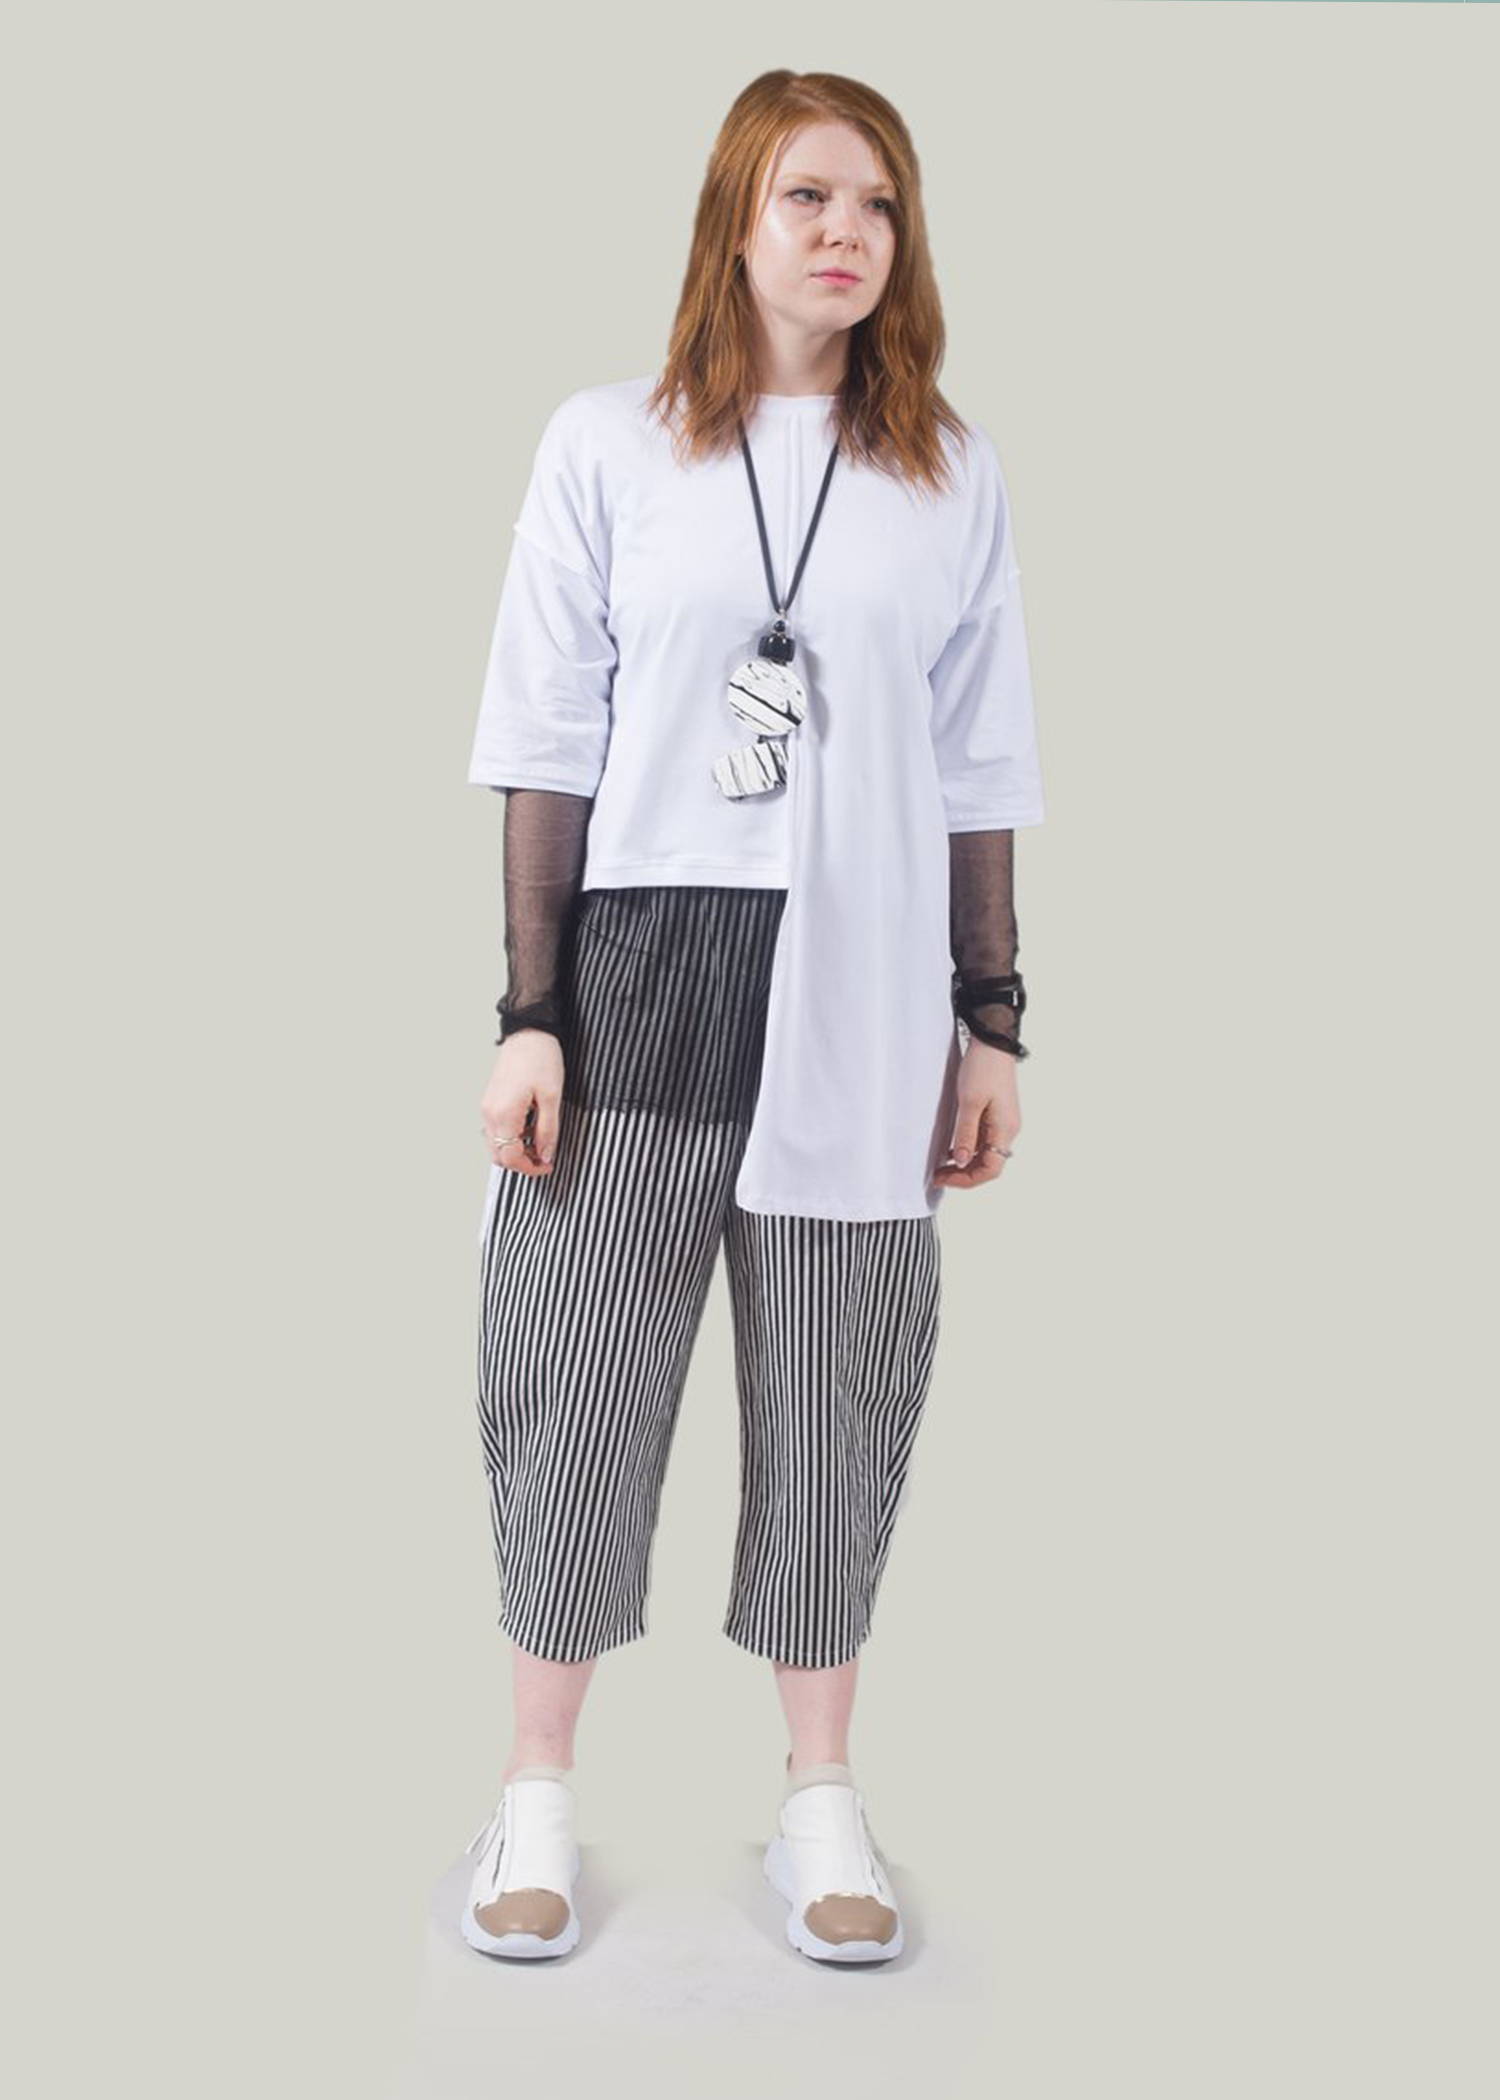 Barely there transparent pieces have become a distinct trend for SS19, giving softer  more feminine feel to your tailored cuts. Adding a layer of sheer to your outfit creates a feminine look while still keeping on trend with asymmetric pieces. We have styled this outfit with stripe trousers to add more prints.